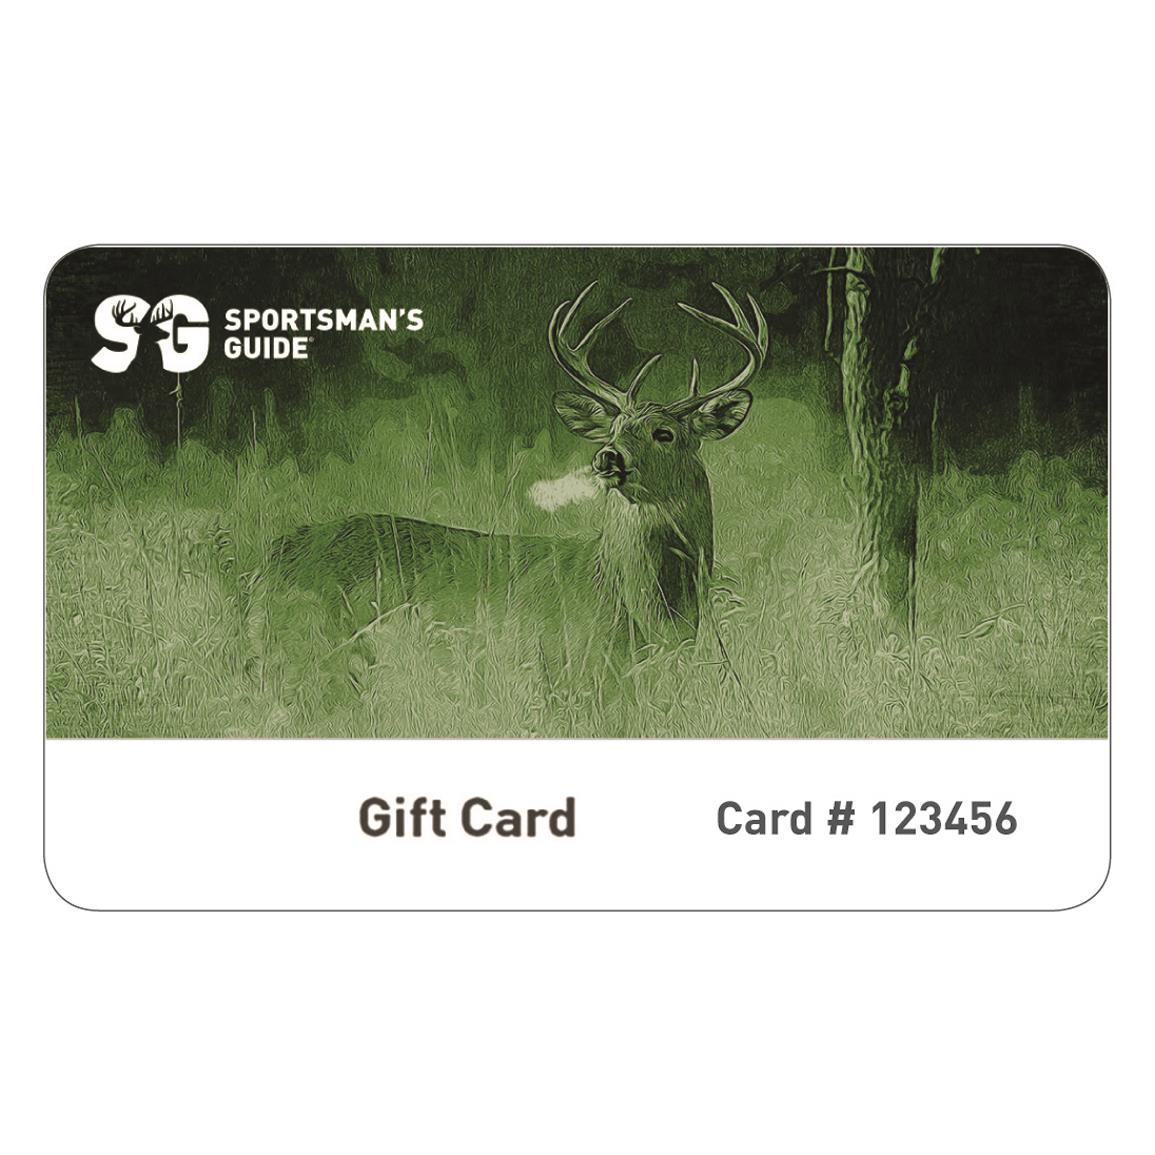 Sportsman's Guide Gift Card